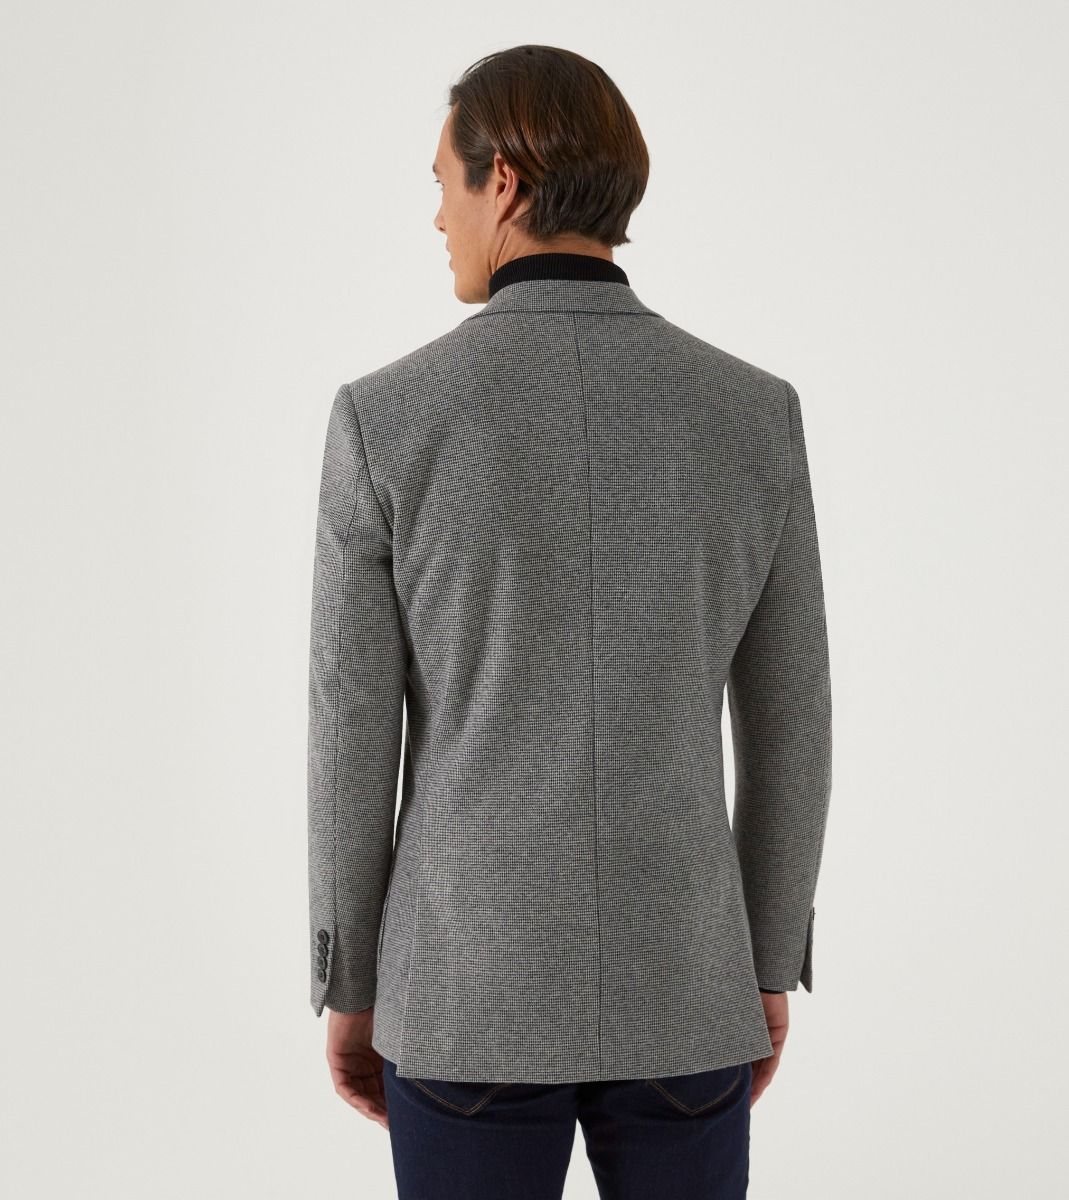 Hastings Tapered Fit Black Grey Blazer-Back view